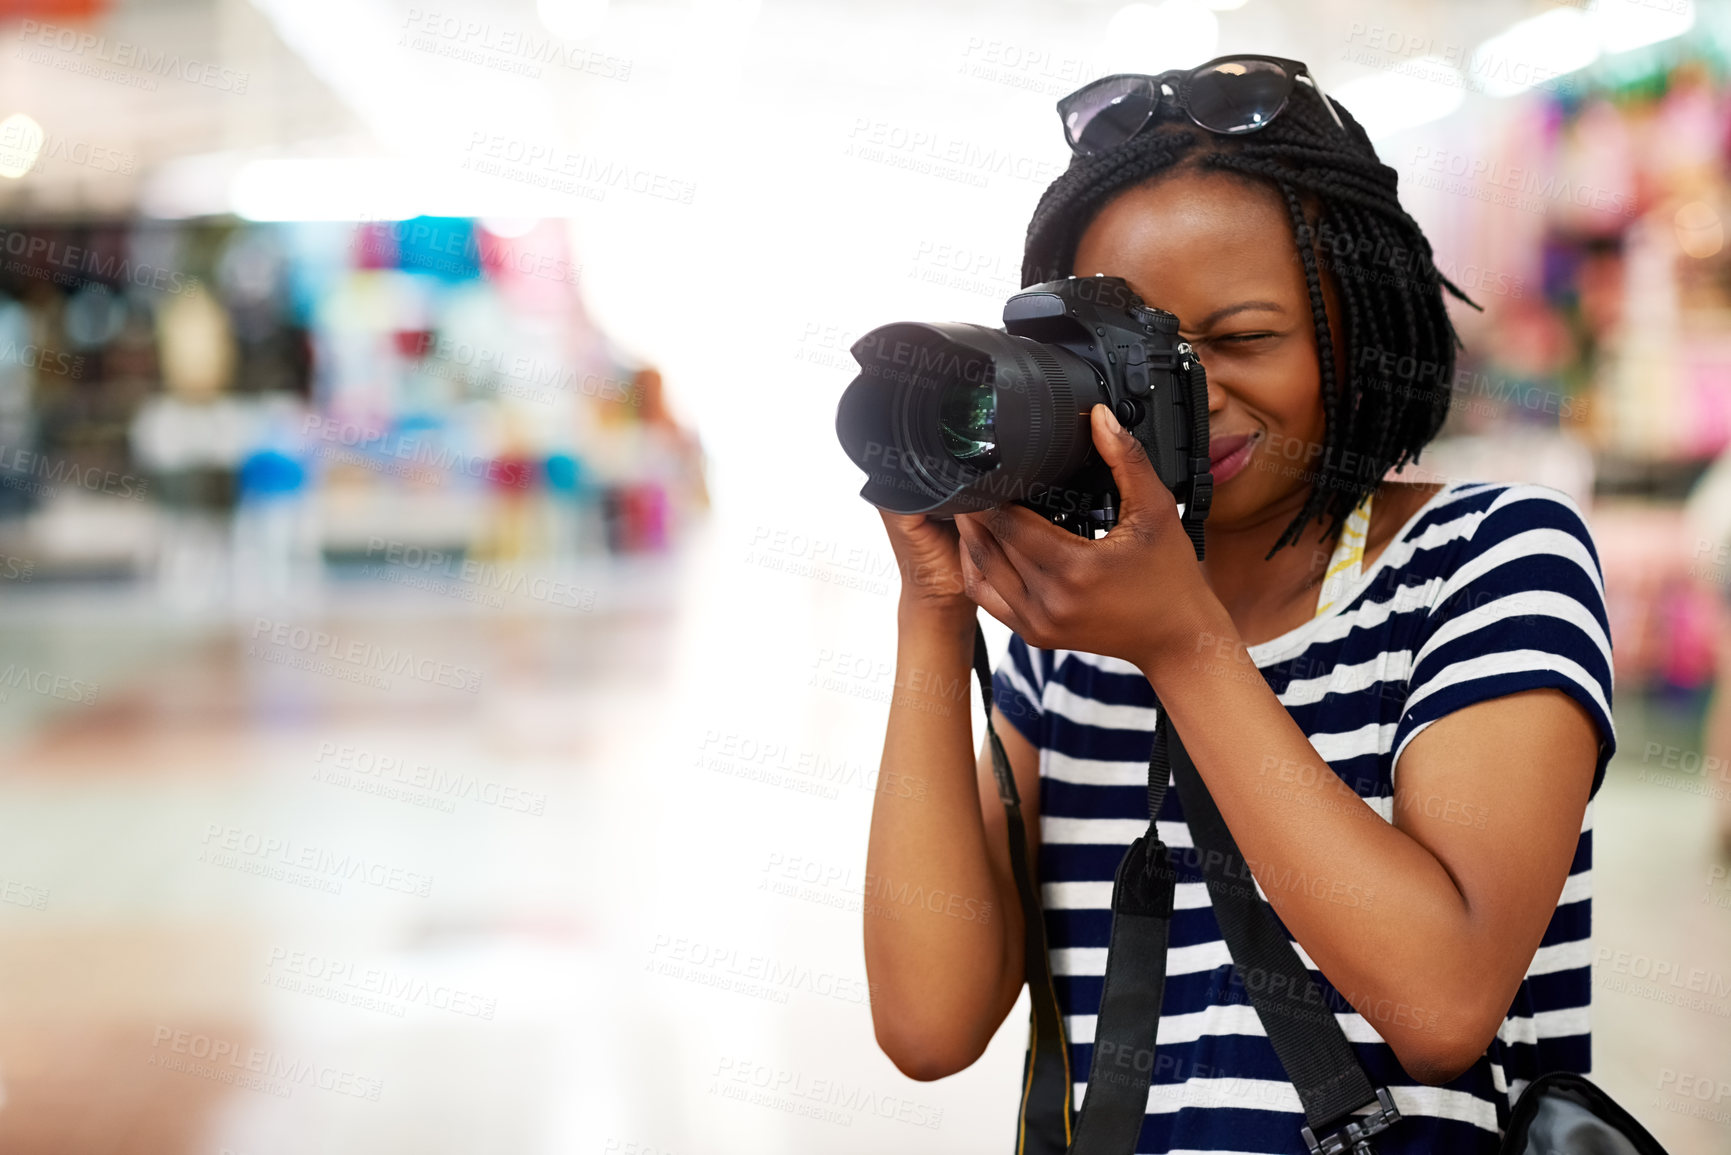 Buy stock photo Shot of a young female tourist snapping photographs inside a grocery store